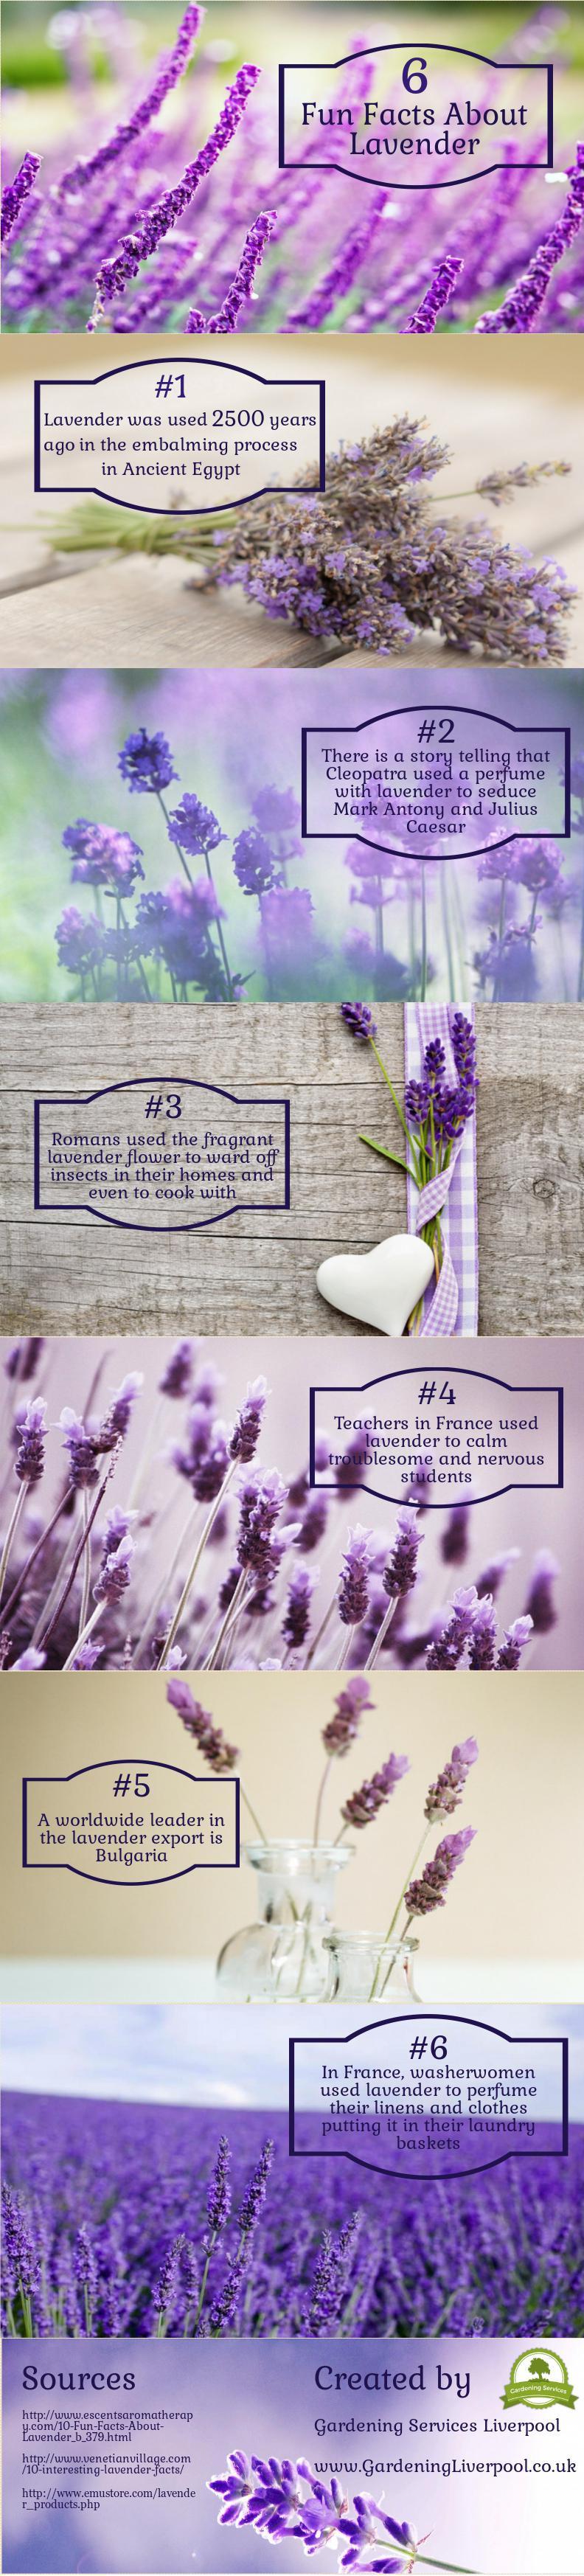 6 Fun Facts About Lavender